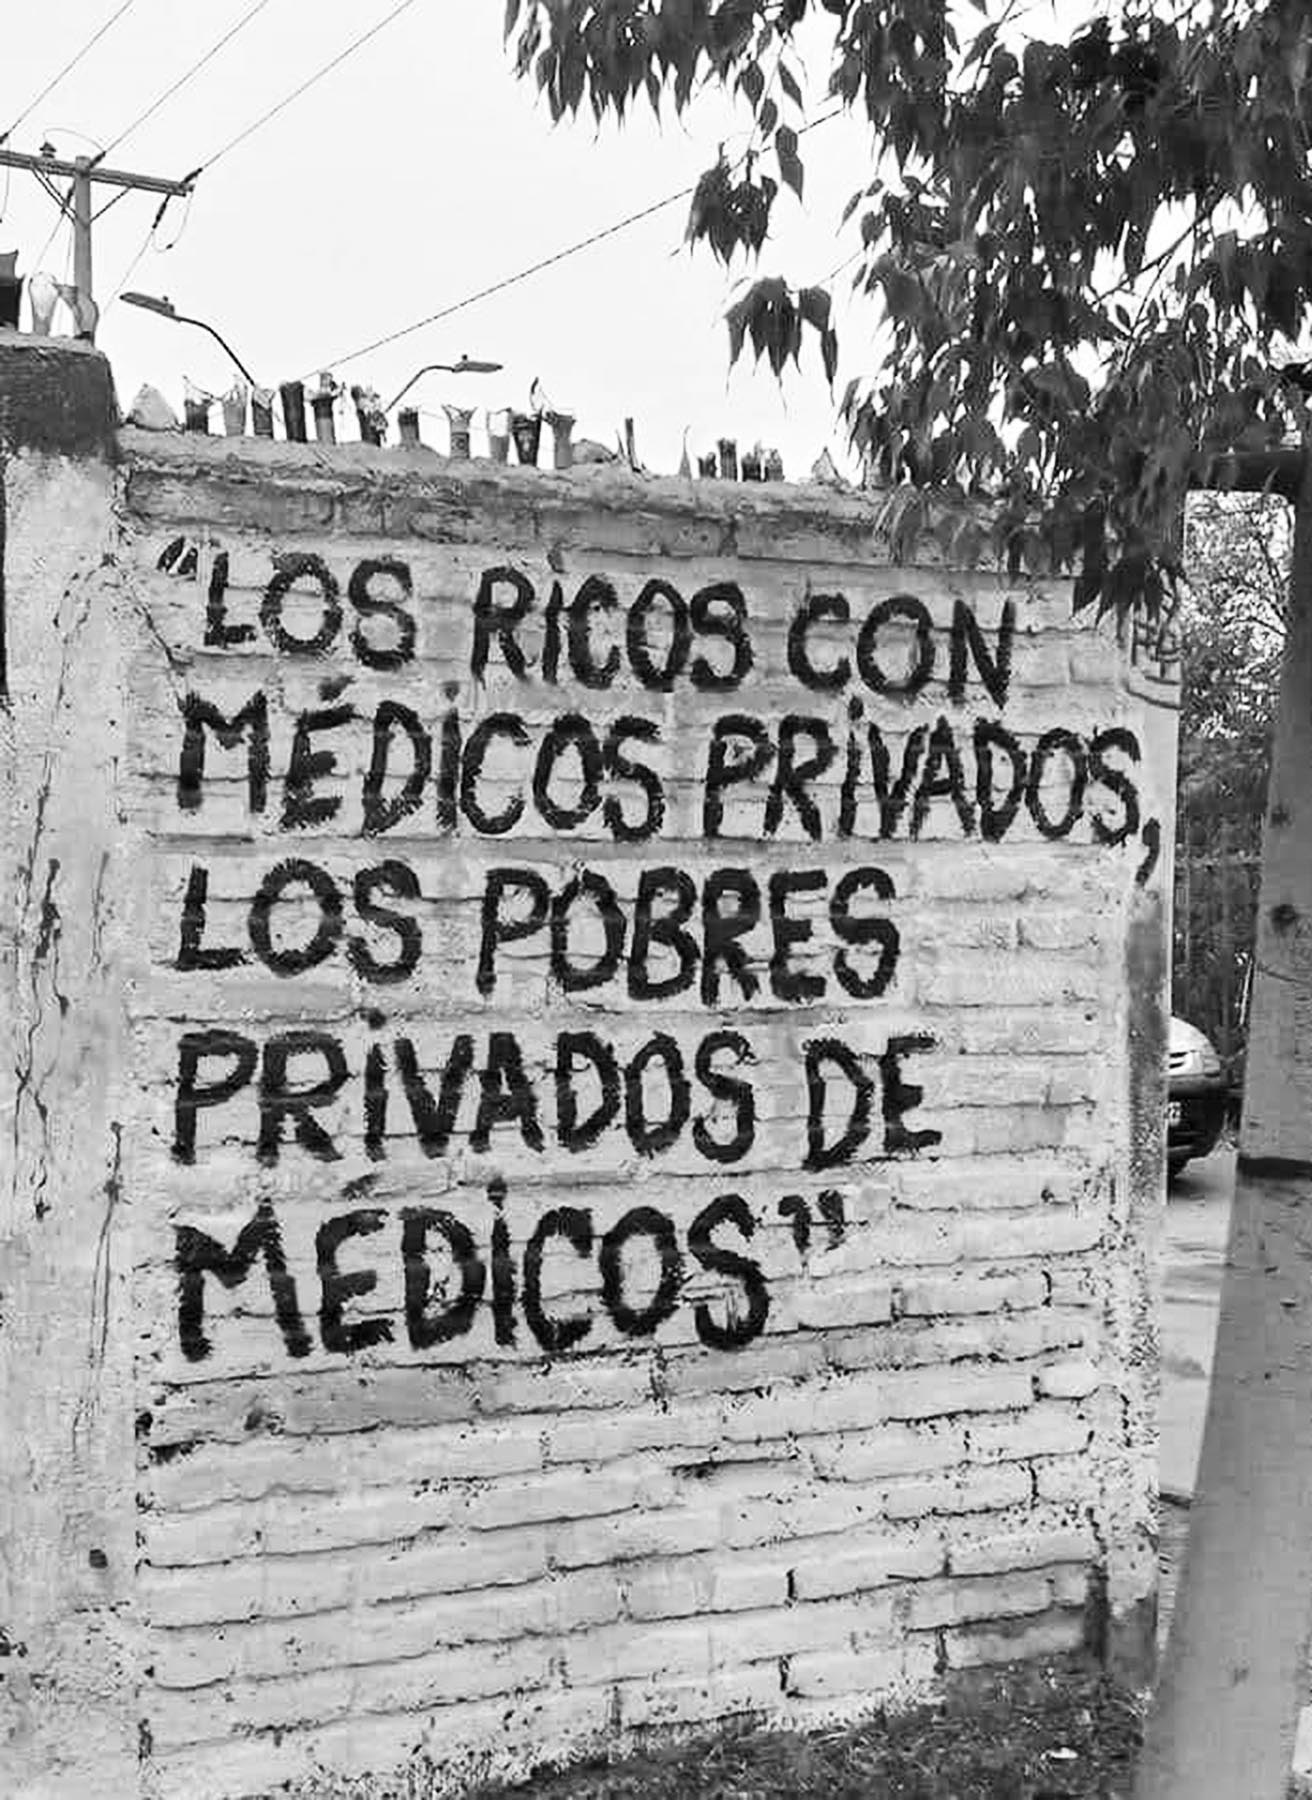 Street graffiti sums up heath care in most of Latin America: “The rich have private doctors while the poor are derived of doctors.”